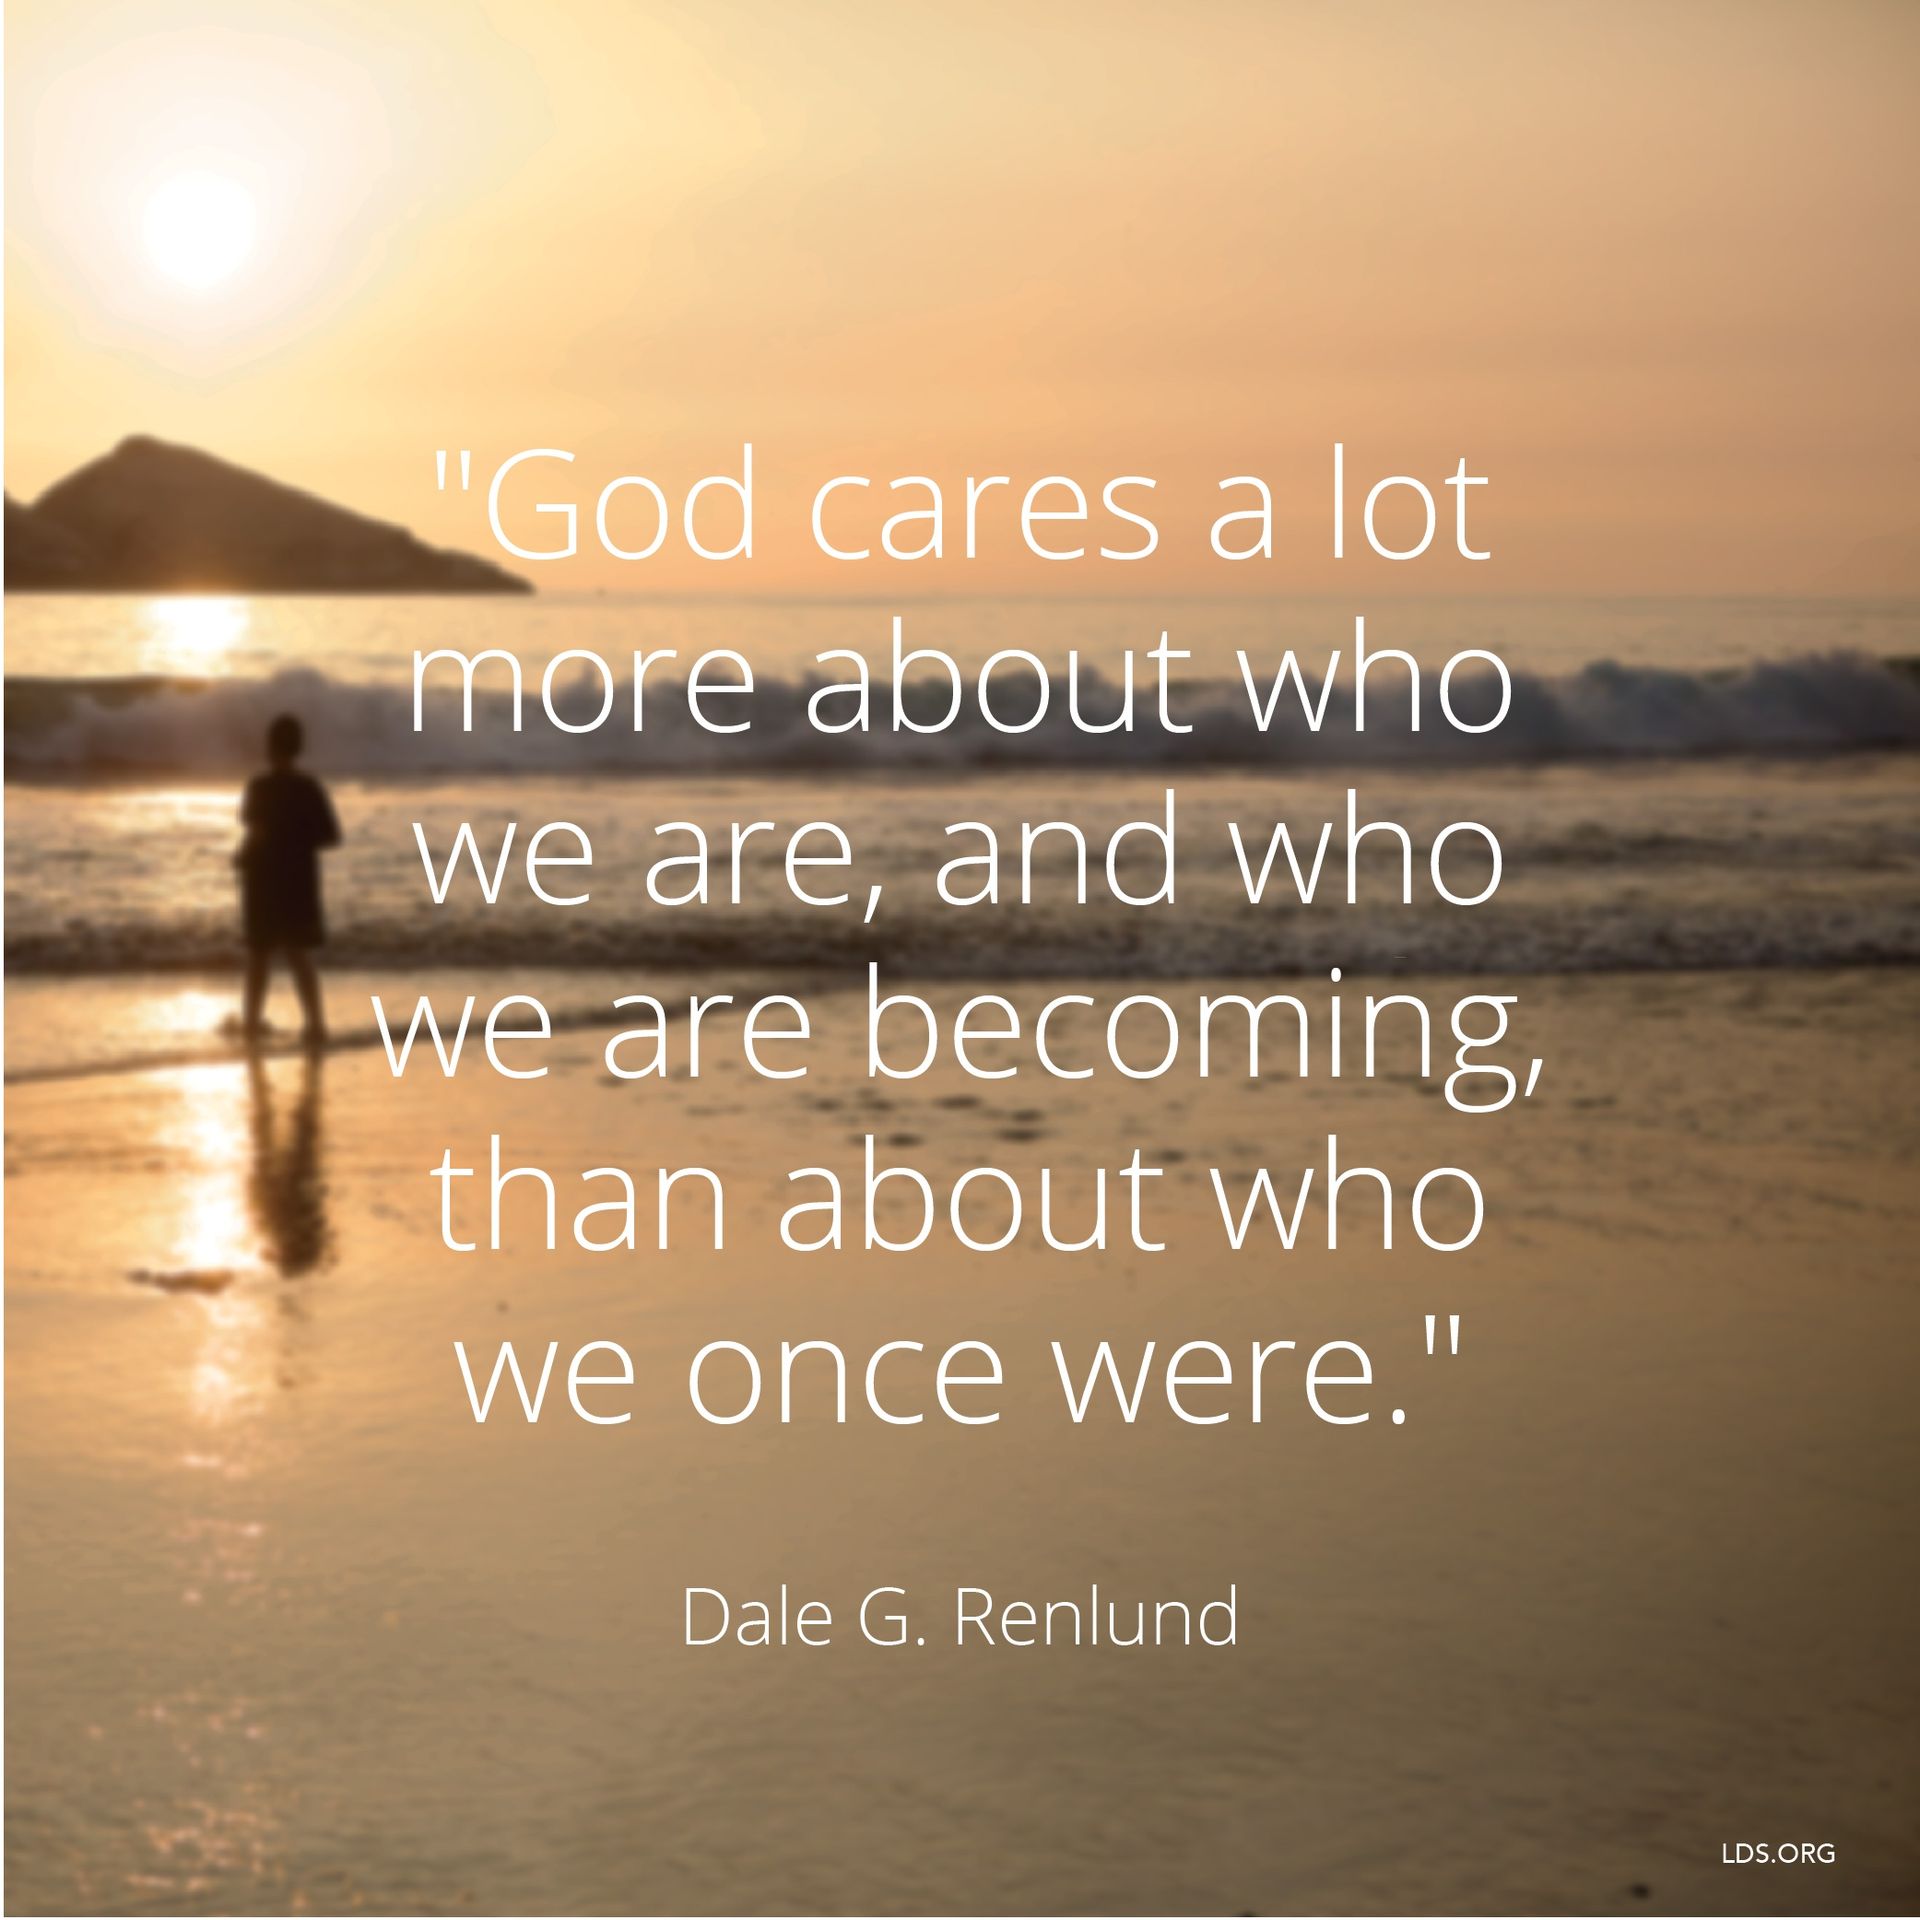 “God cares a lot more about who we are, and who we are becoming, than about who we once were.”—Elder Dale G. Renlund, “Latter-day Saints Keep on Trying.” © undefined ipCode 1.